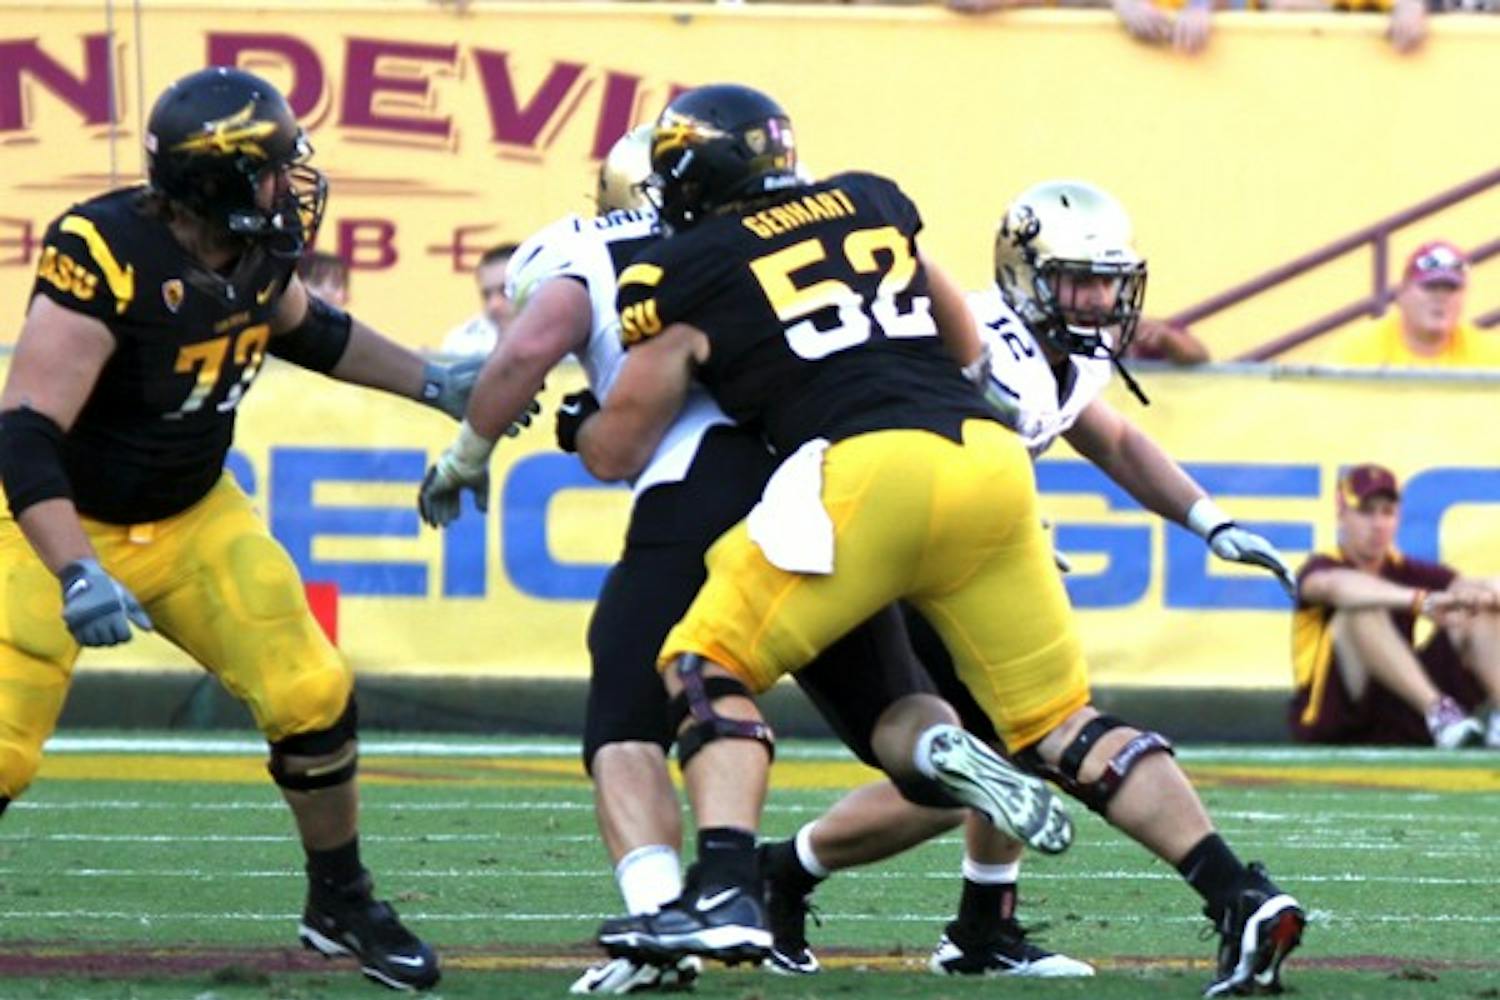 FAMILY MAN: ASU redshirt senior offensive linemen Garth Gerhart blocks off a Colorado pass rusher during the Sun Devils’ 48-18 victory over the Buffaloes. California-based players like Gerhart are expecting many of their friends and families to be in attendance at Saturday’s game at UCLA. (Photo by Lisa Bartoli) 